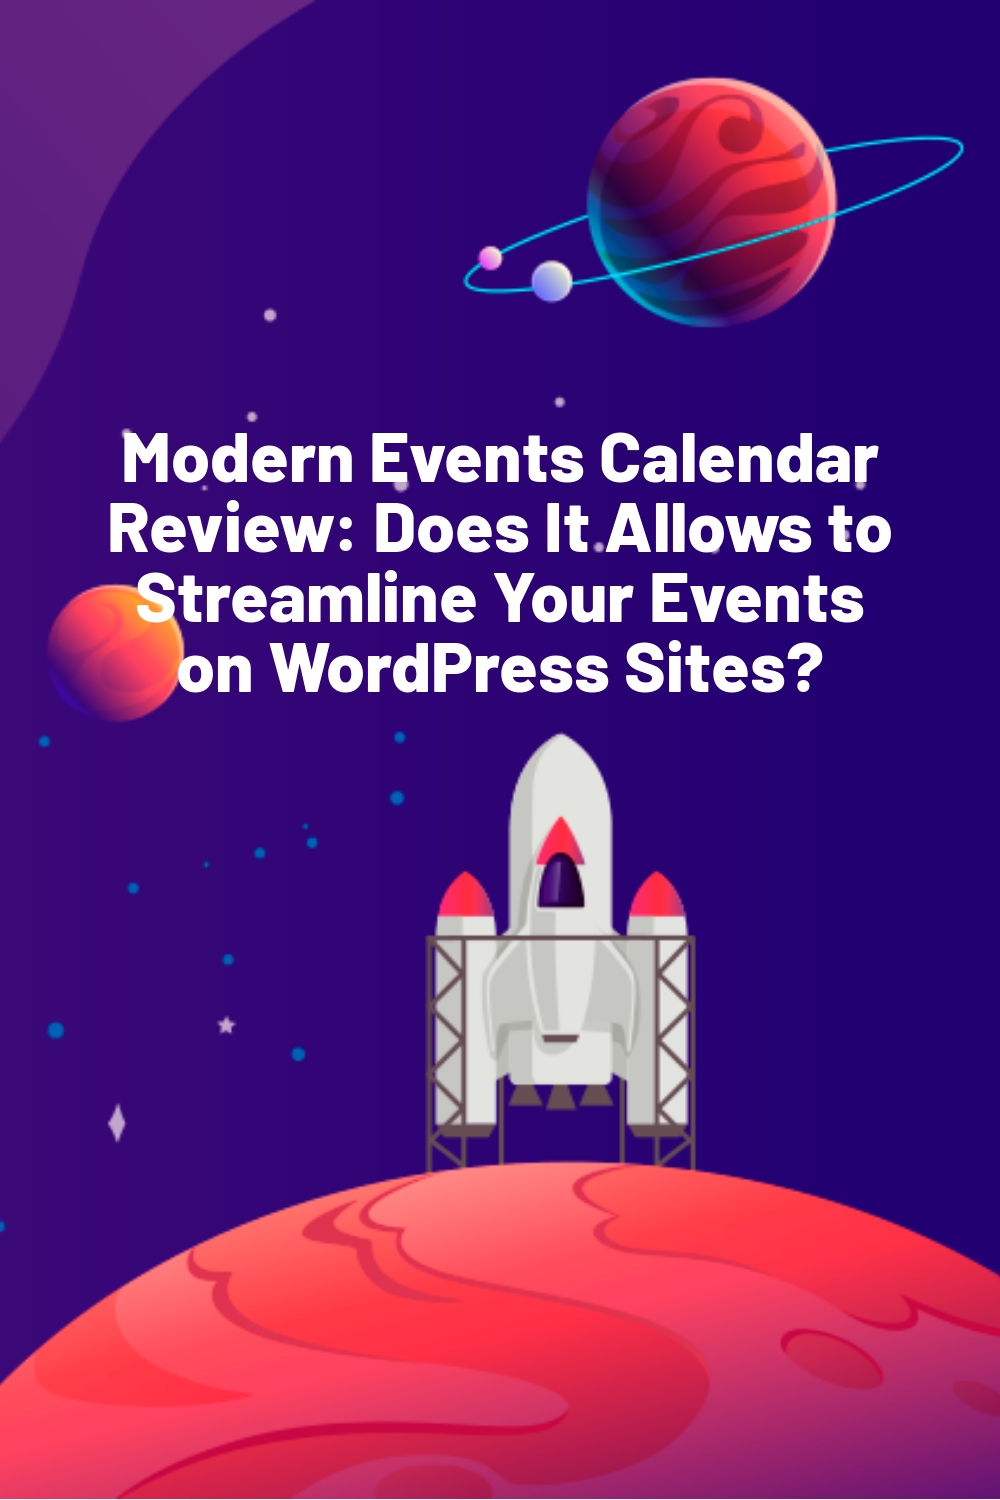 Modern Events Calendar Review: Does It Allows to Streamline Your Events on WordPress Sites?